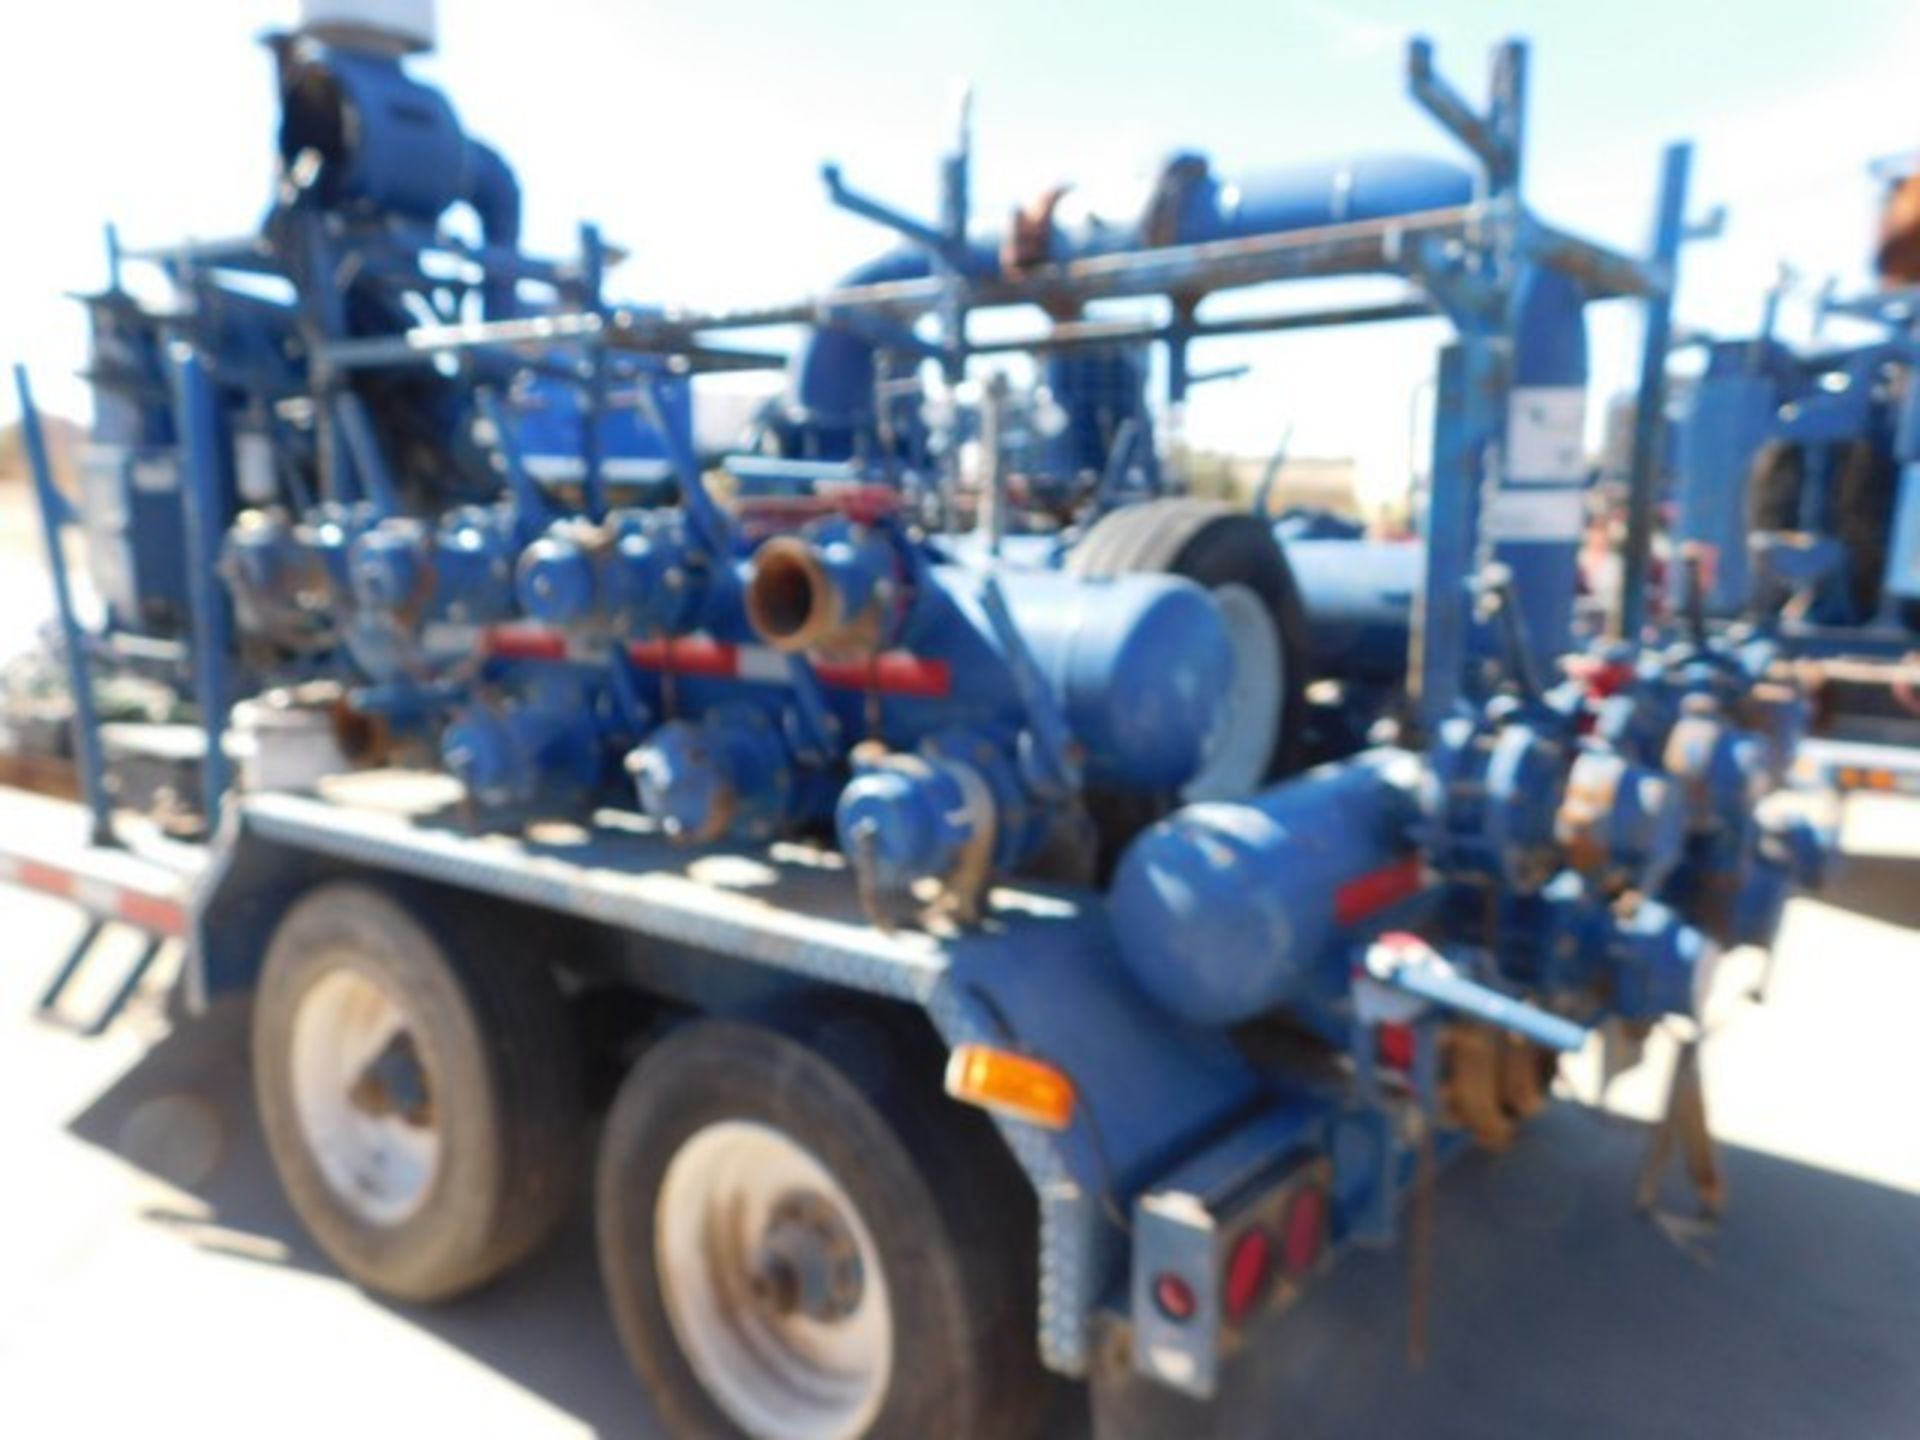 Located in YARD 2 - Odessa, TX (FPS040) (X) 2012 KEYSTONE CENT BOOST PUMP TRAILER, VIN- - Image 3 of 4